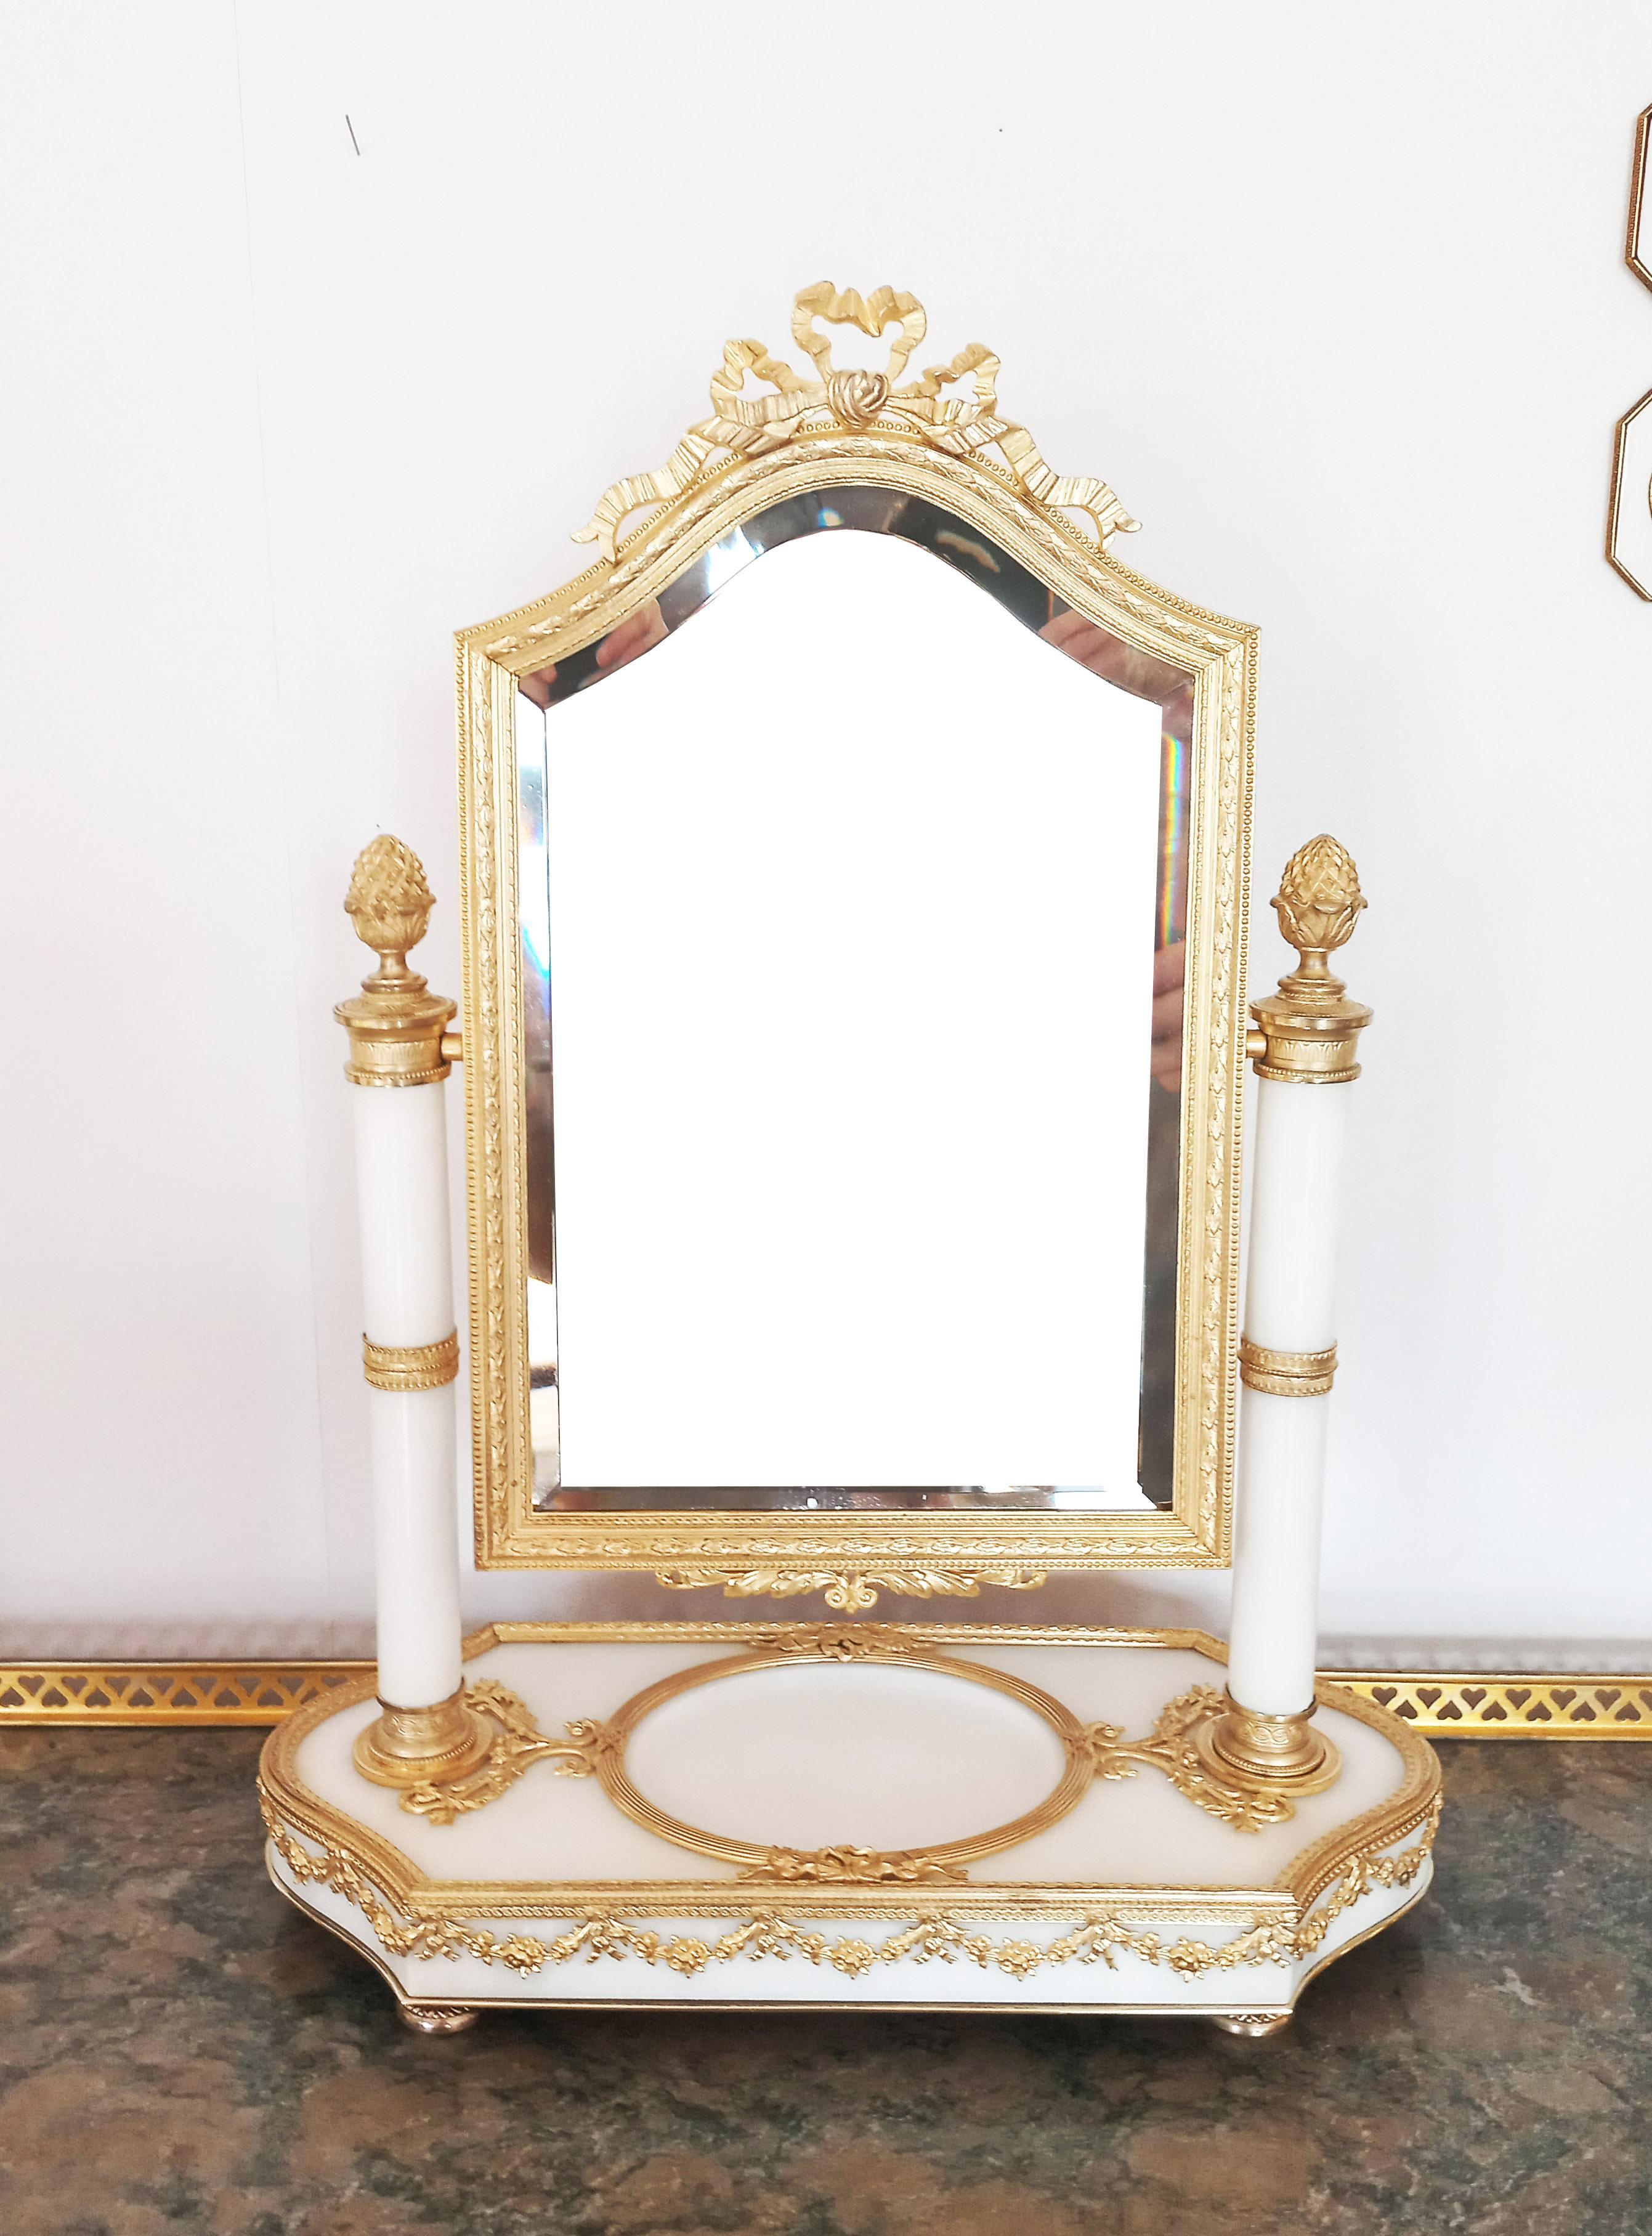 Table psyche in gilded bronze and Carrara marble.
Rich ornamentation in chiseled bronze.
Curved marble base.
Plain white Carrara marble.
Beveled mirror.
Very good condition.
Louis XVI style.
Late 19th century